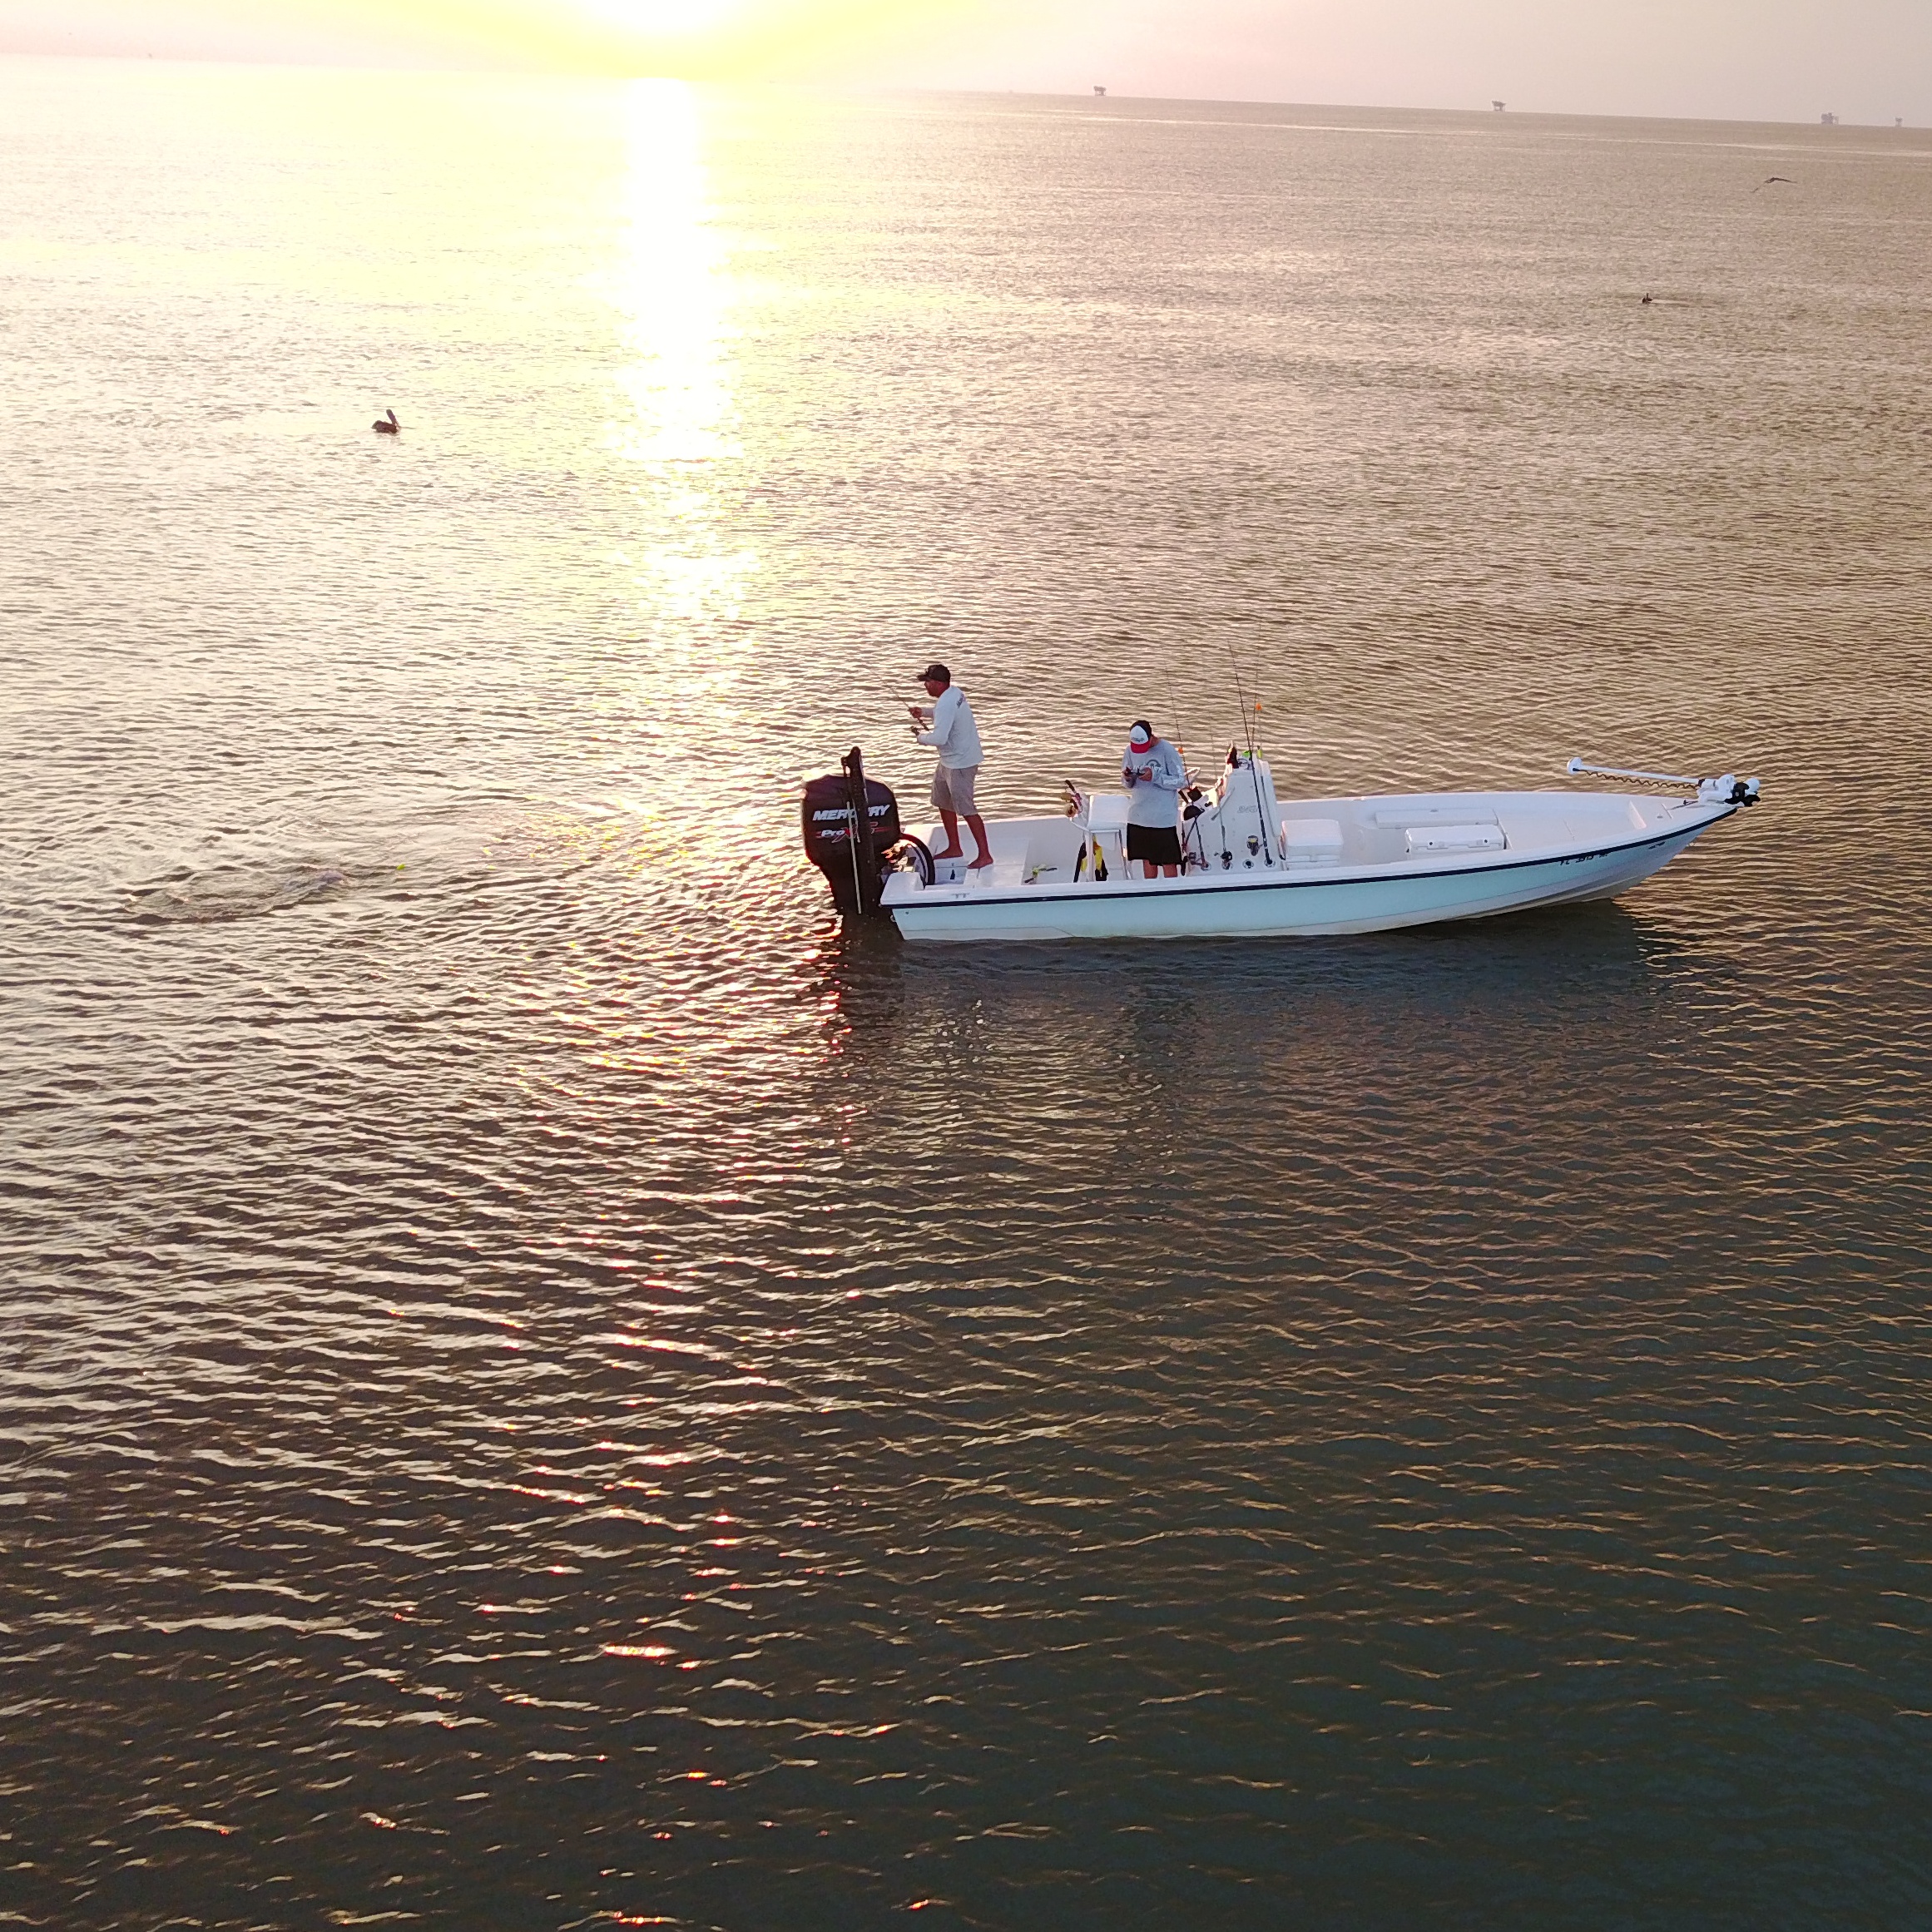 24 Pathfinder Clearwater fishing charters